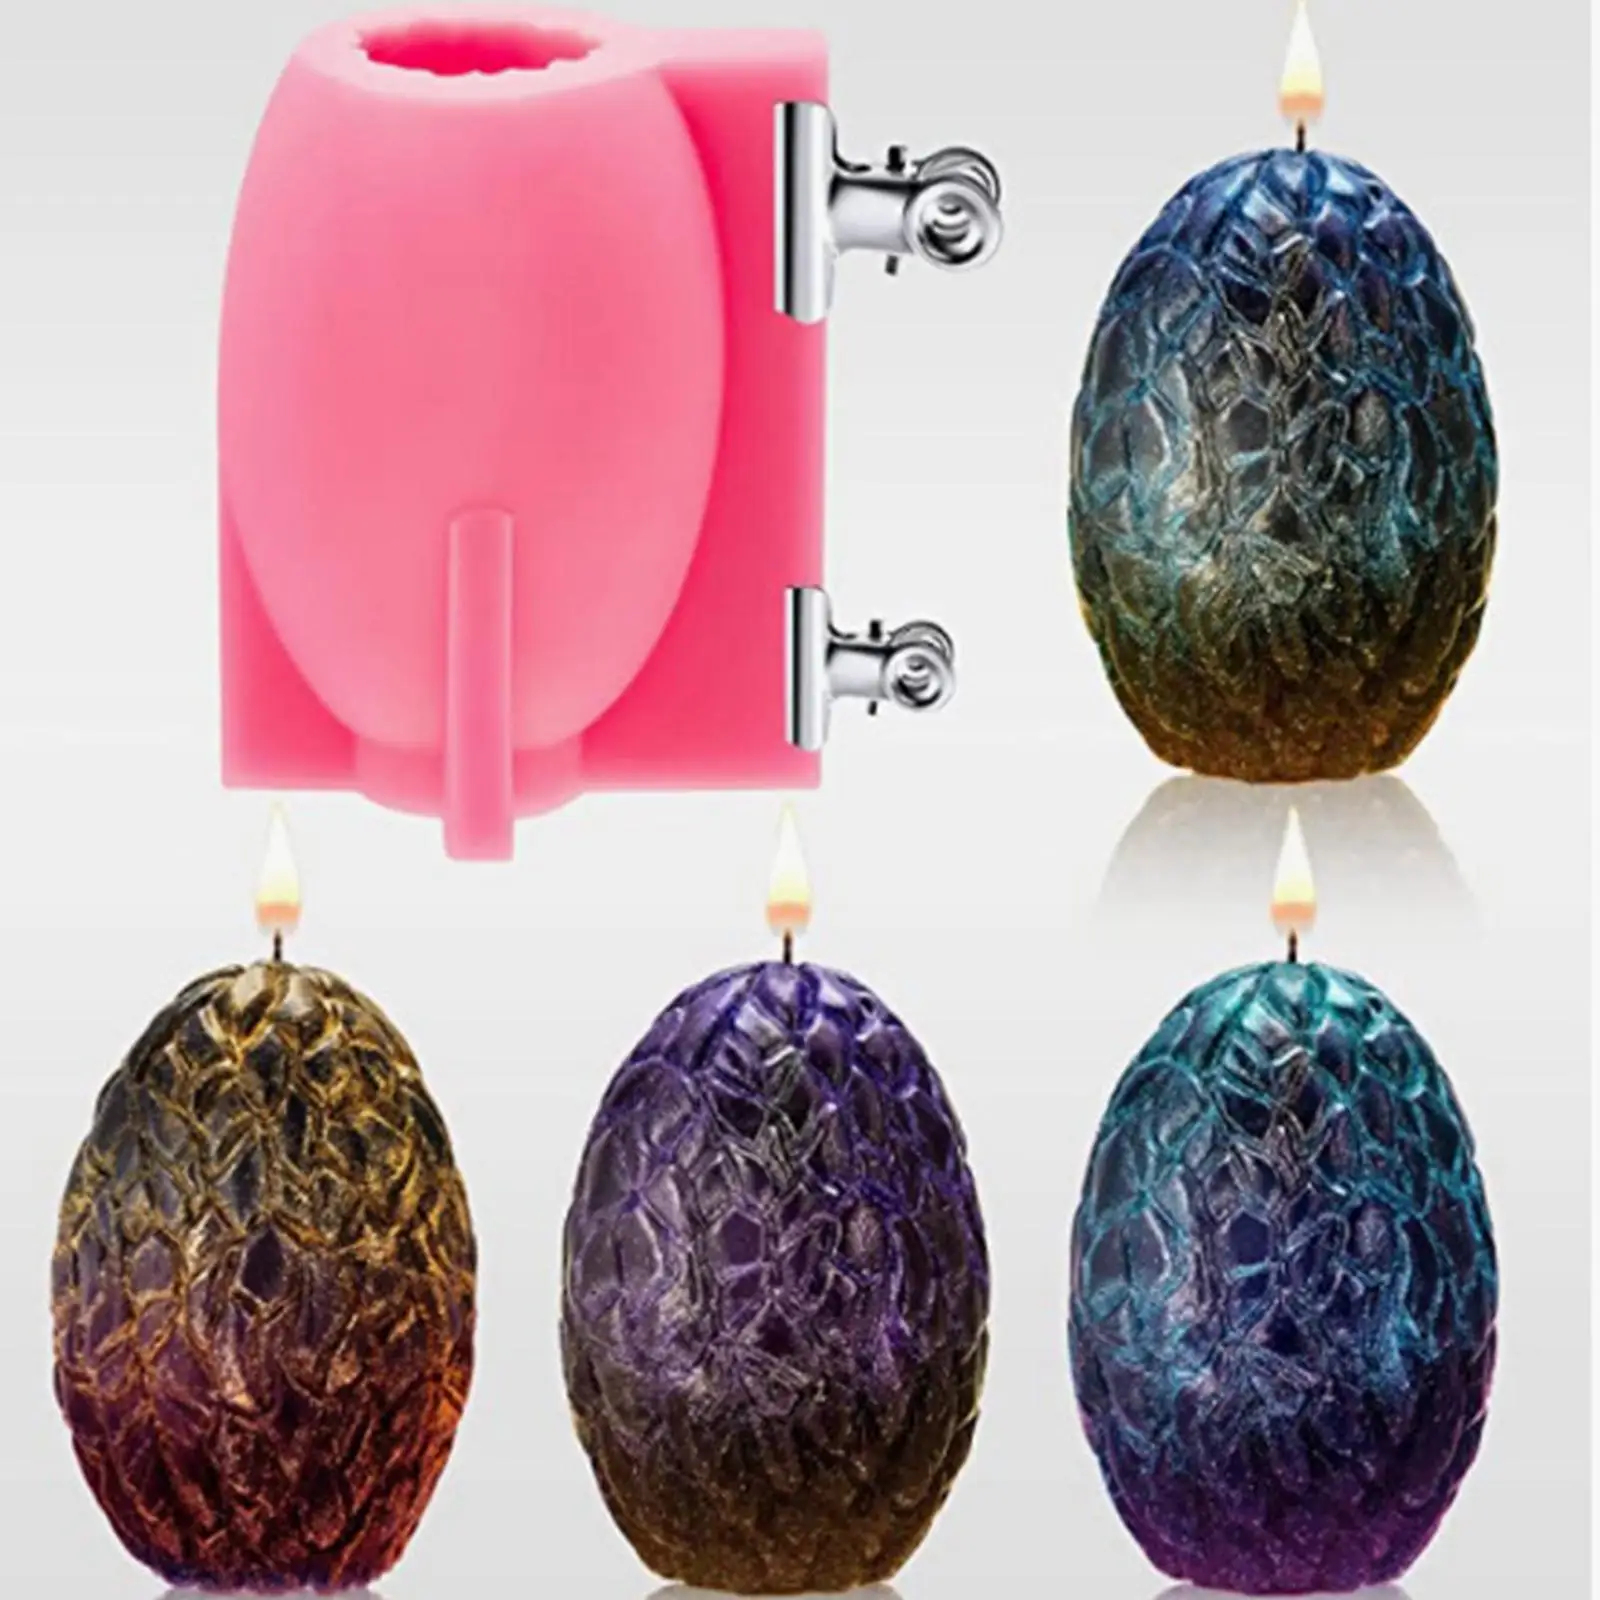 Dragon Egg Epoxy Resin Mold Silicone Mould Diy Craft Ornament Decoration Casting Tool Plaster Candles Making